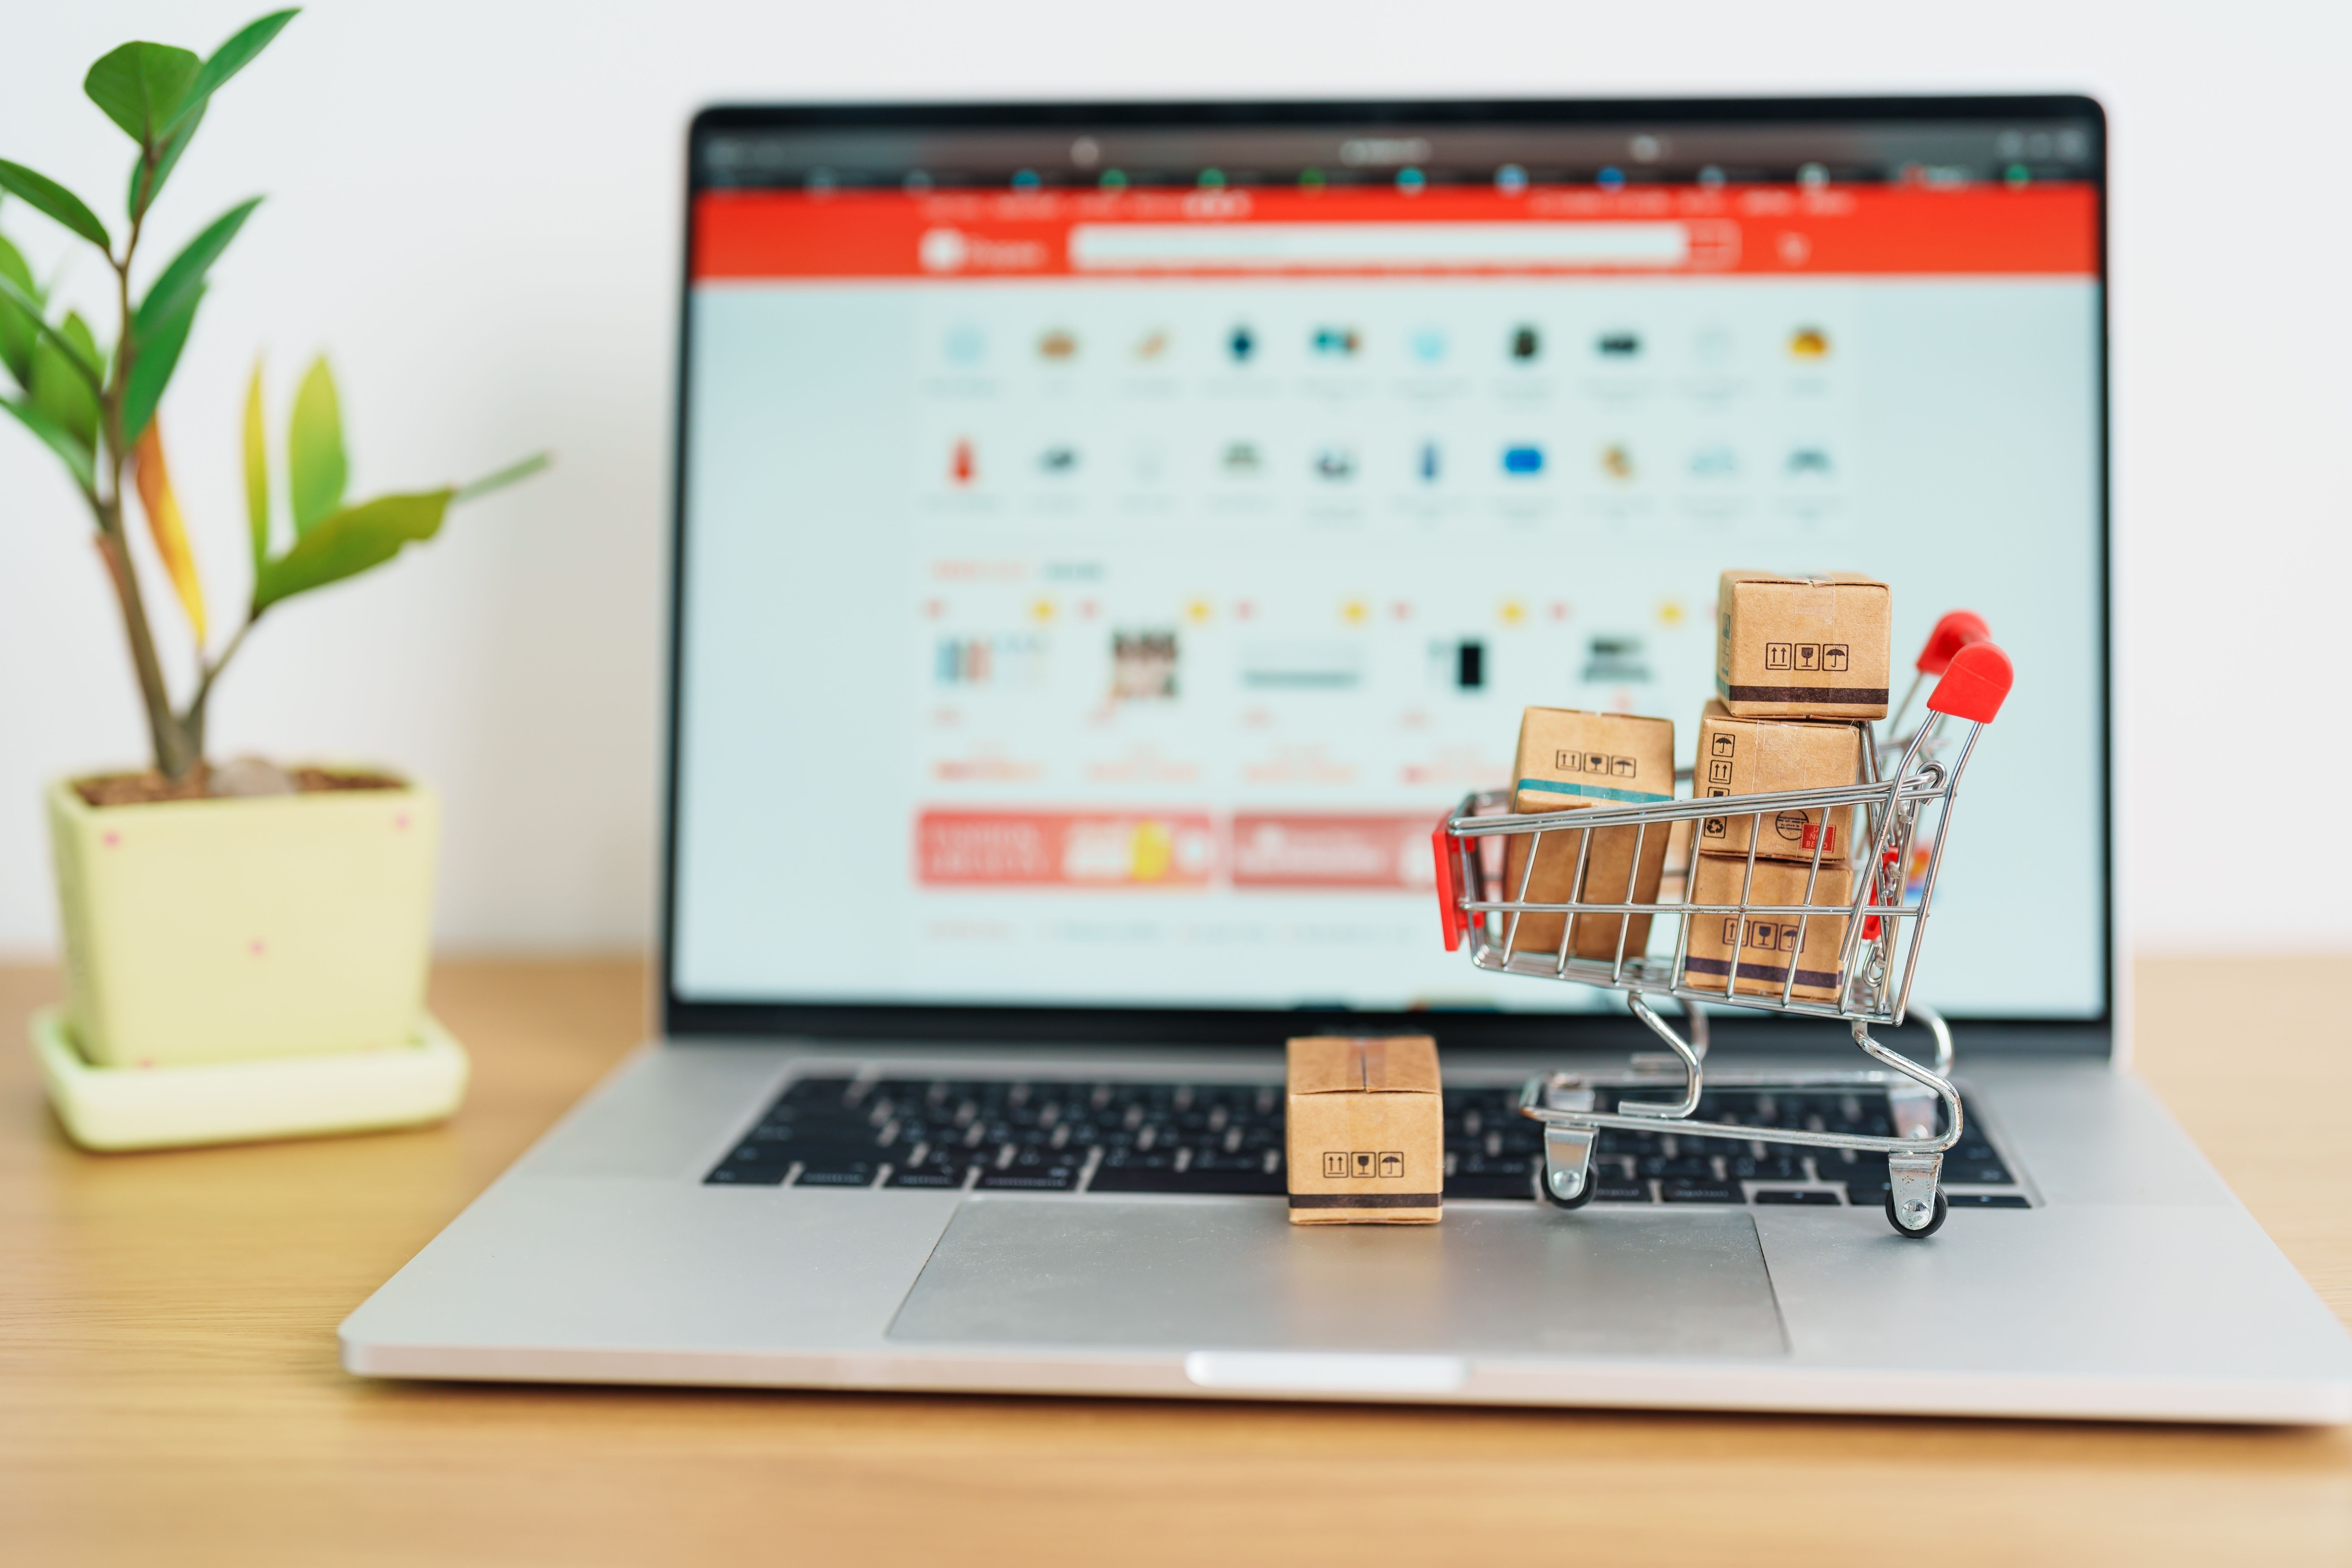 shopping cart on laptop full of tiny boxes on light brown desk with plant